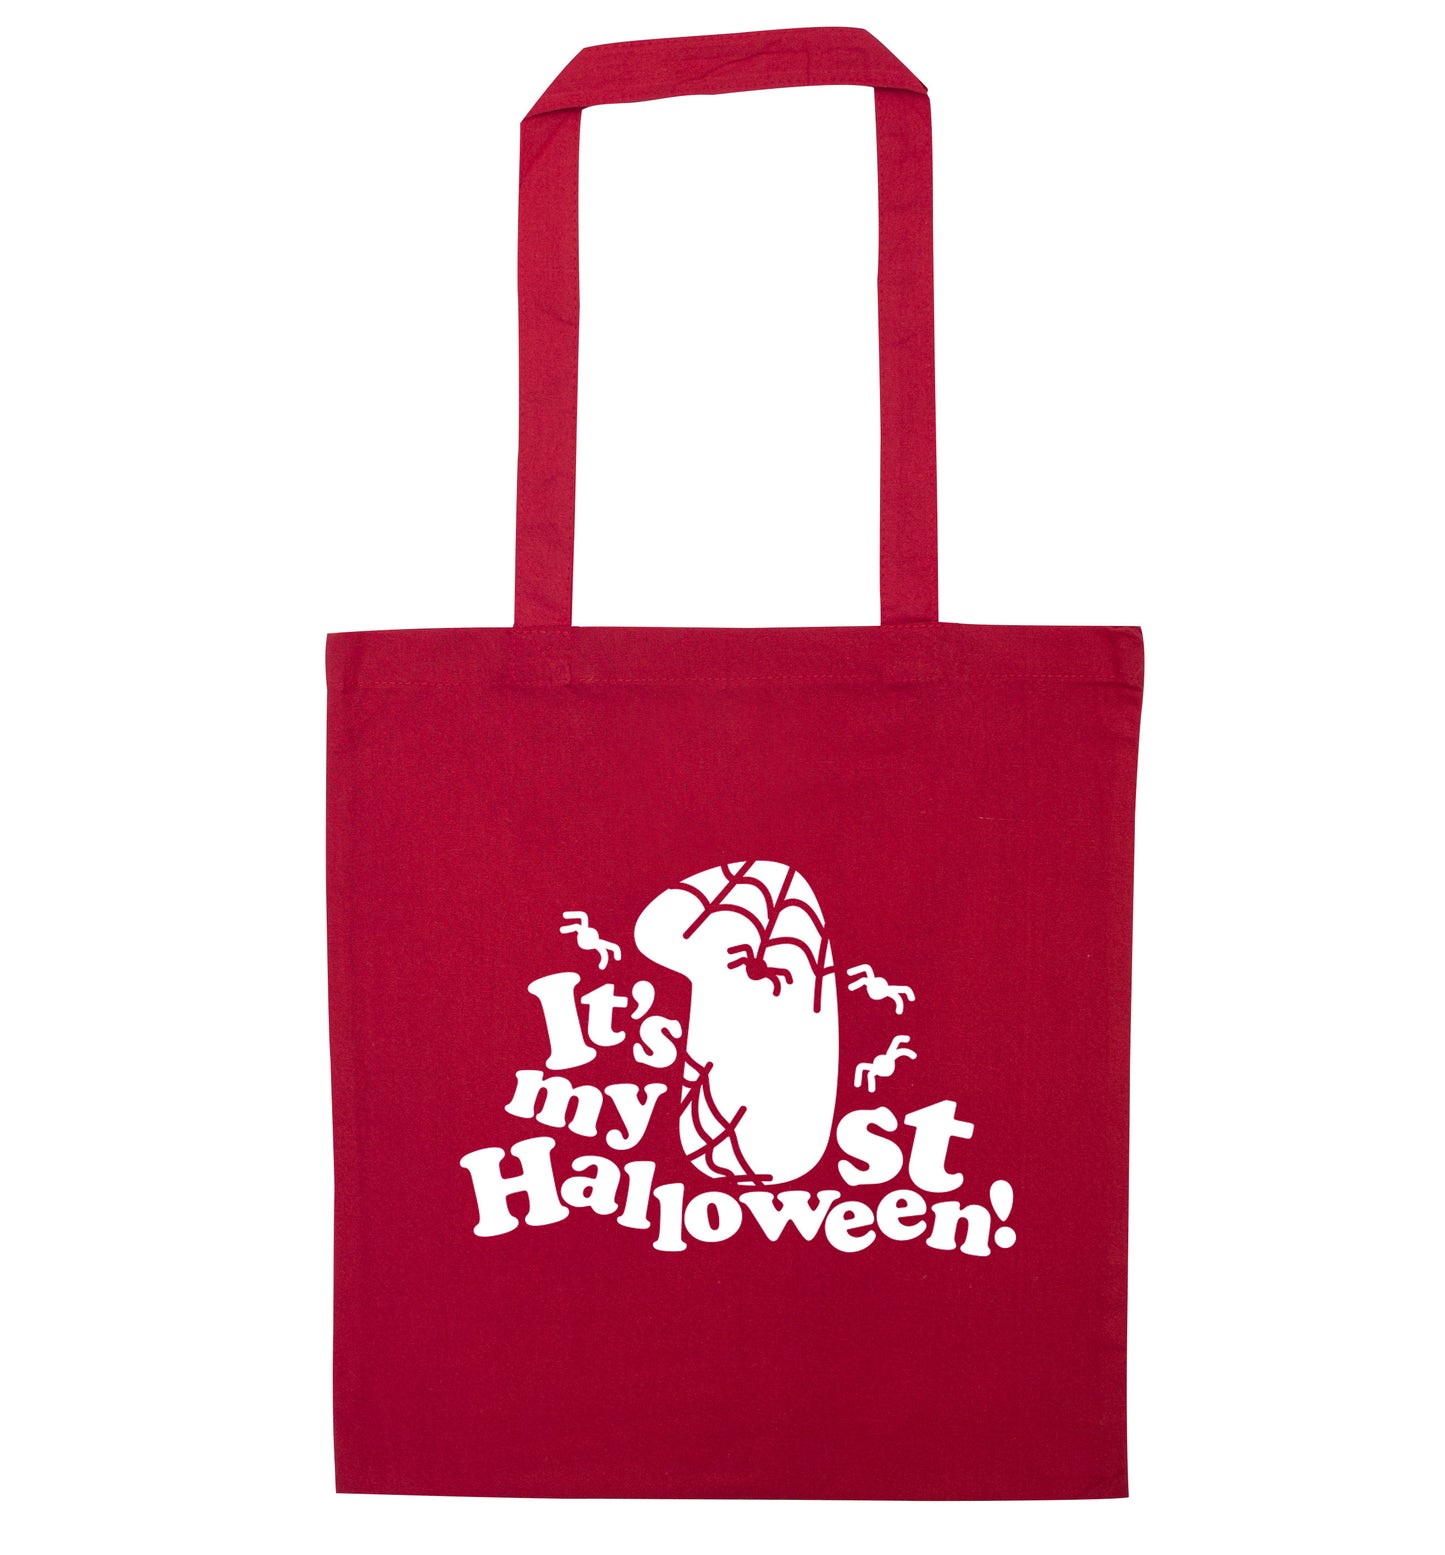 1st Halloween red tote bag